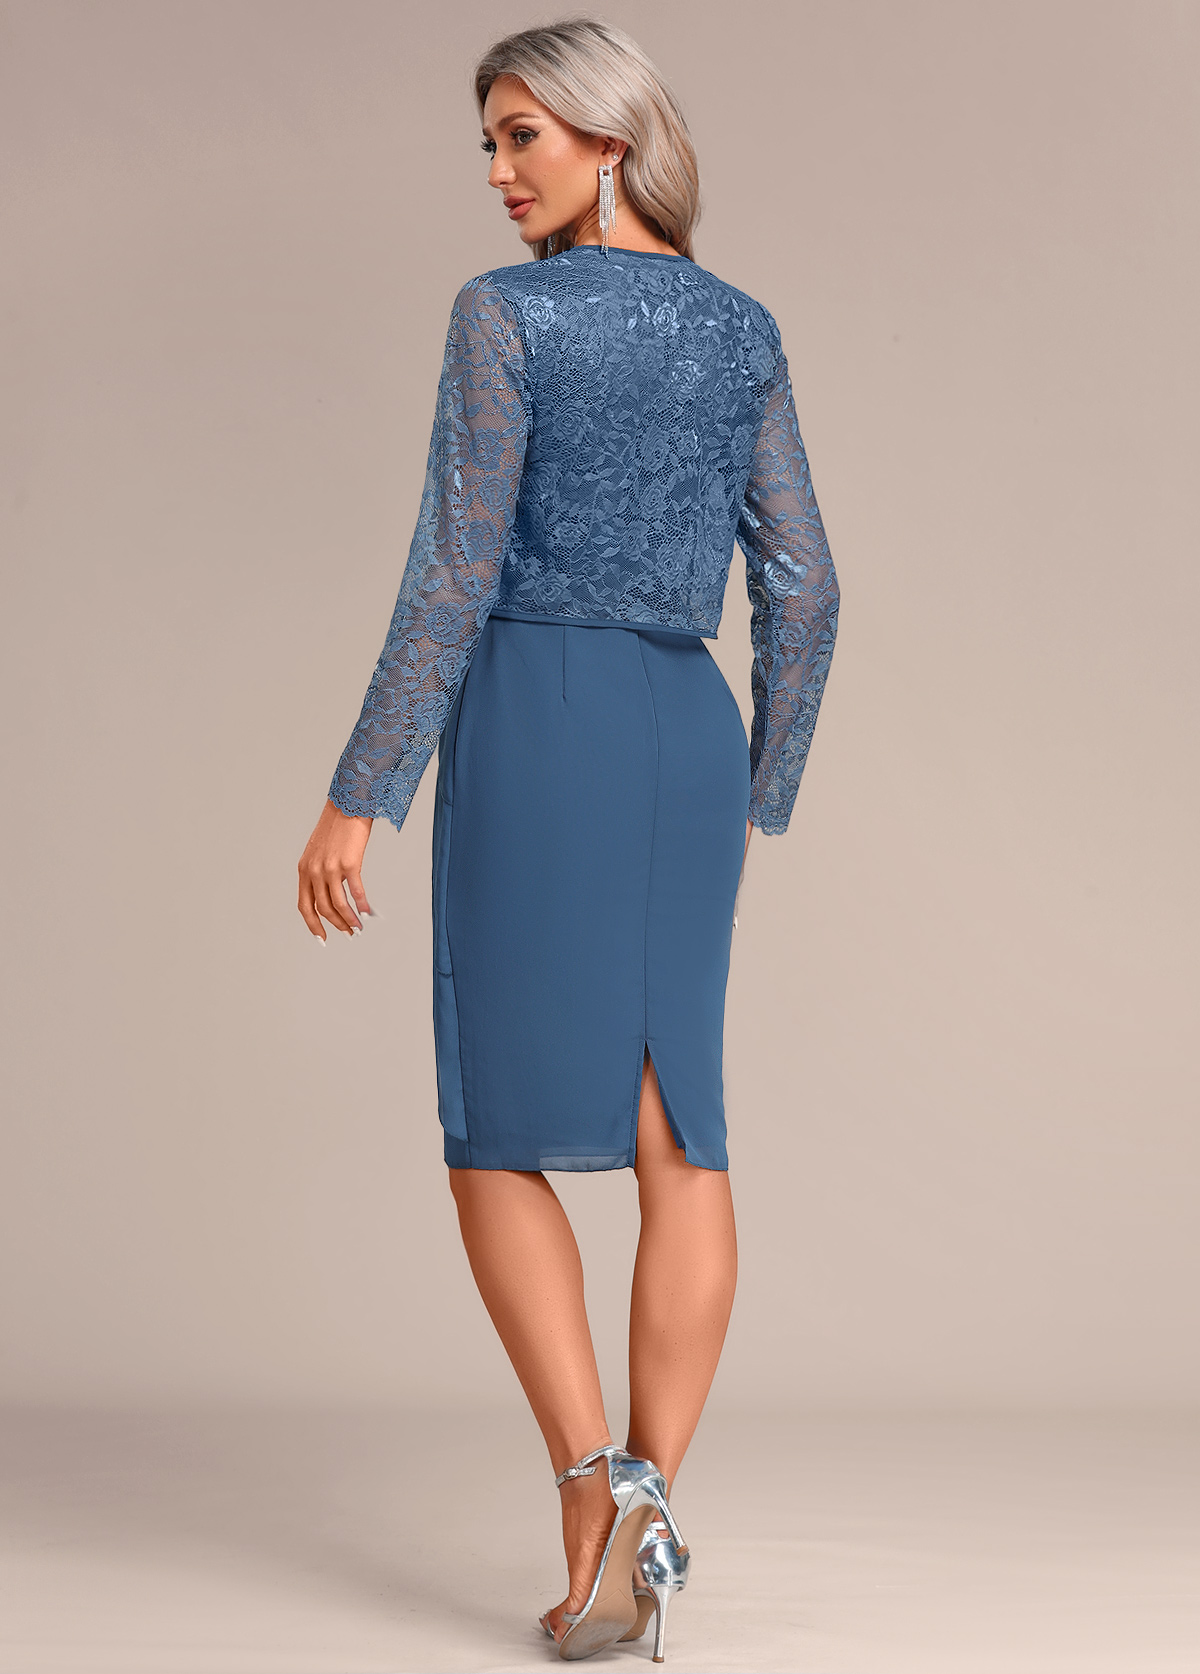 Layered Peacock Blue Two Piece Suit Dress and Cardigan